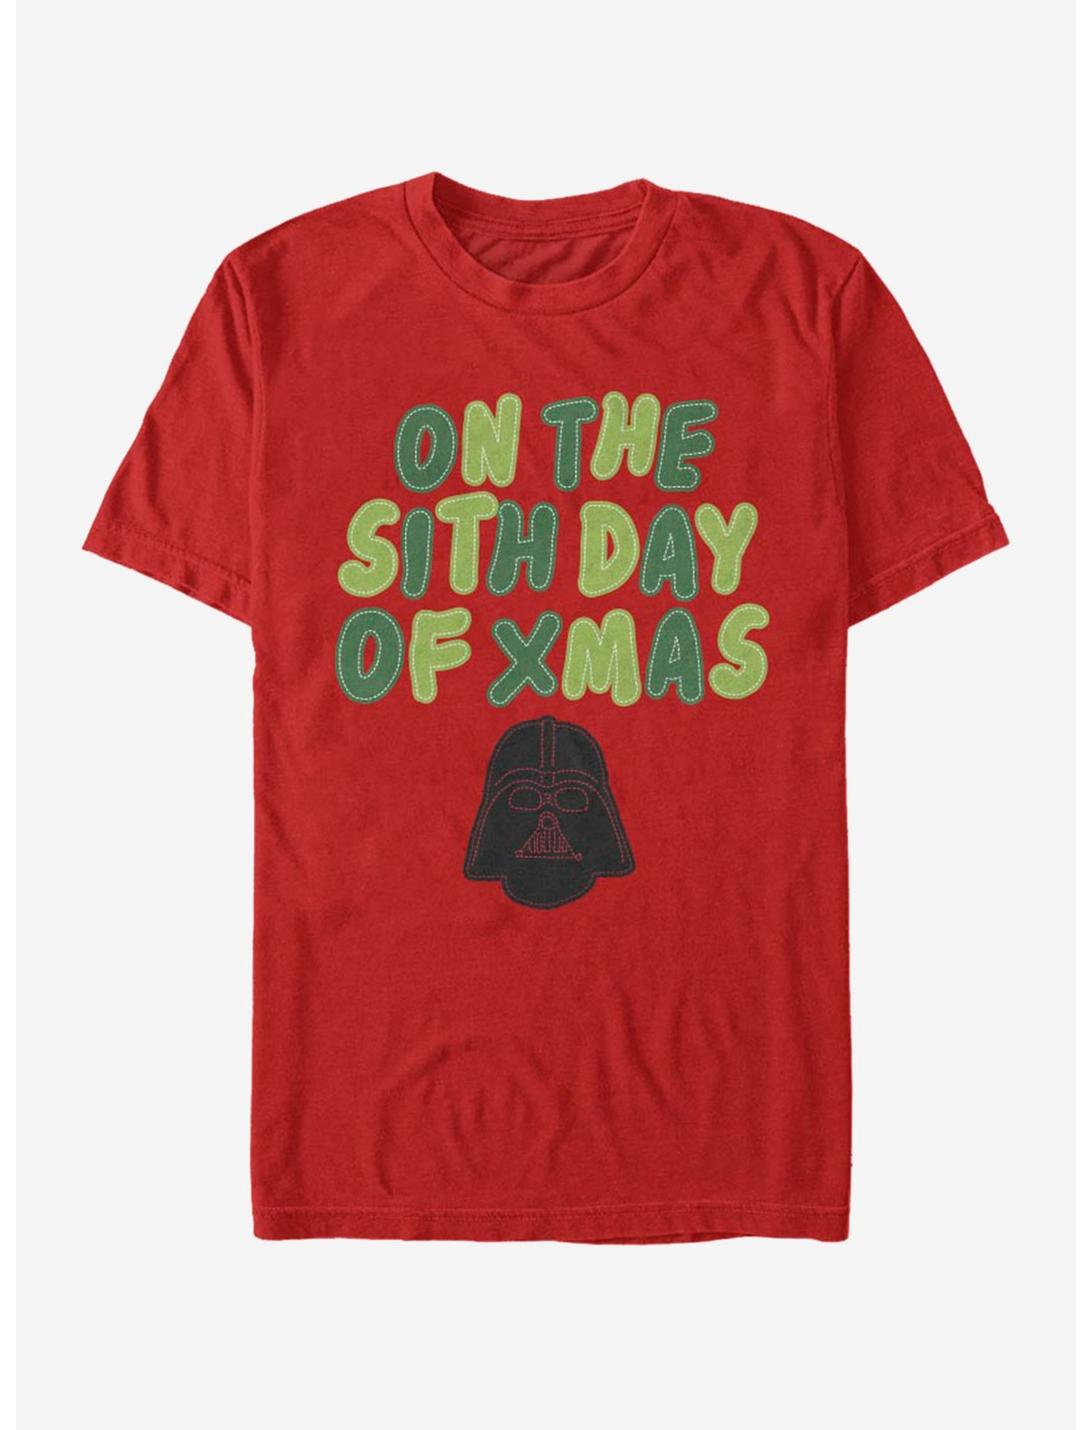 Star Wars Sith Day T-Shirt, RED, hi-res